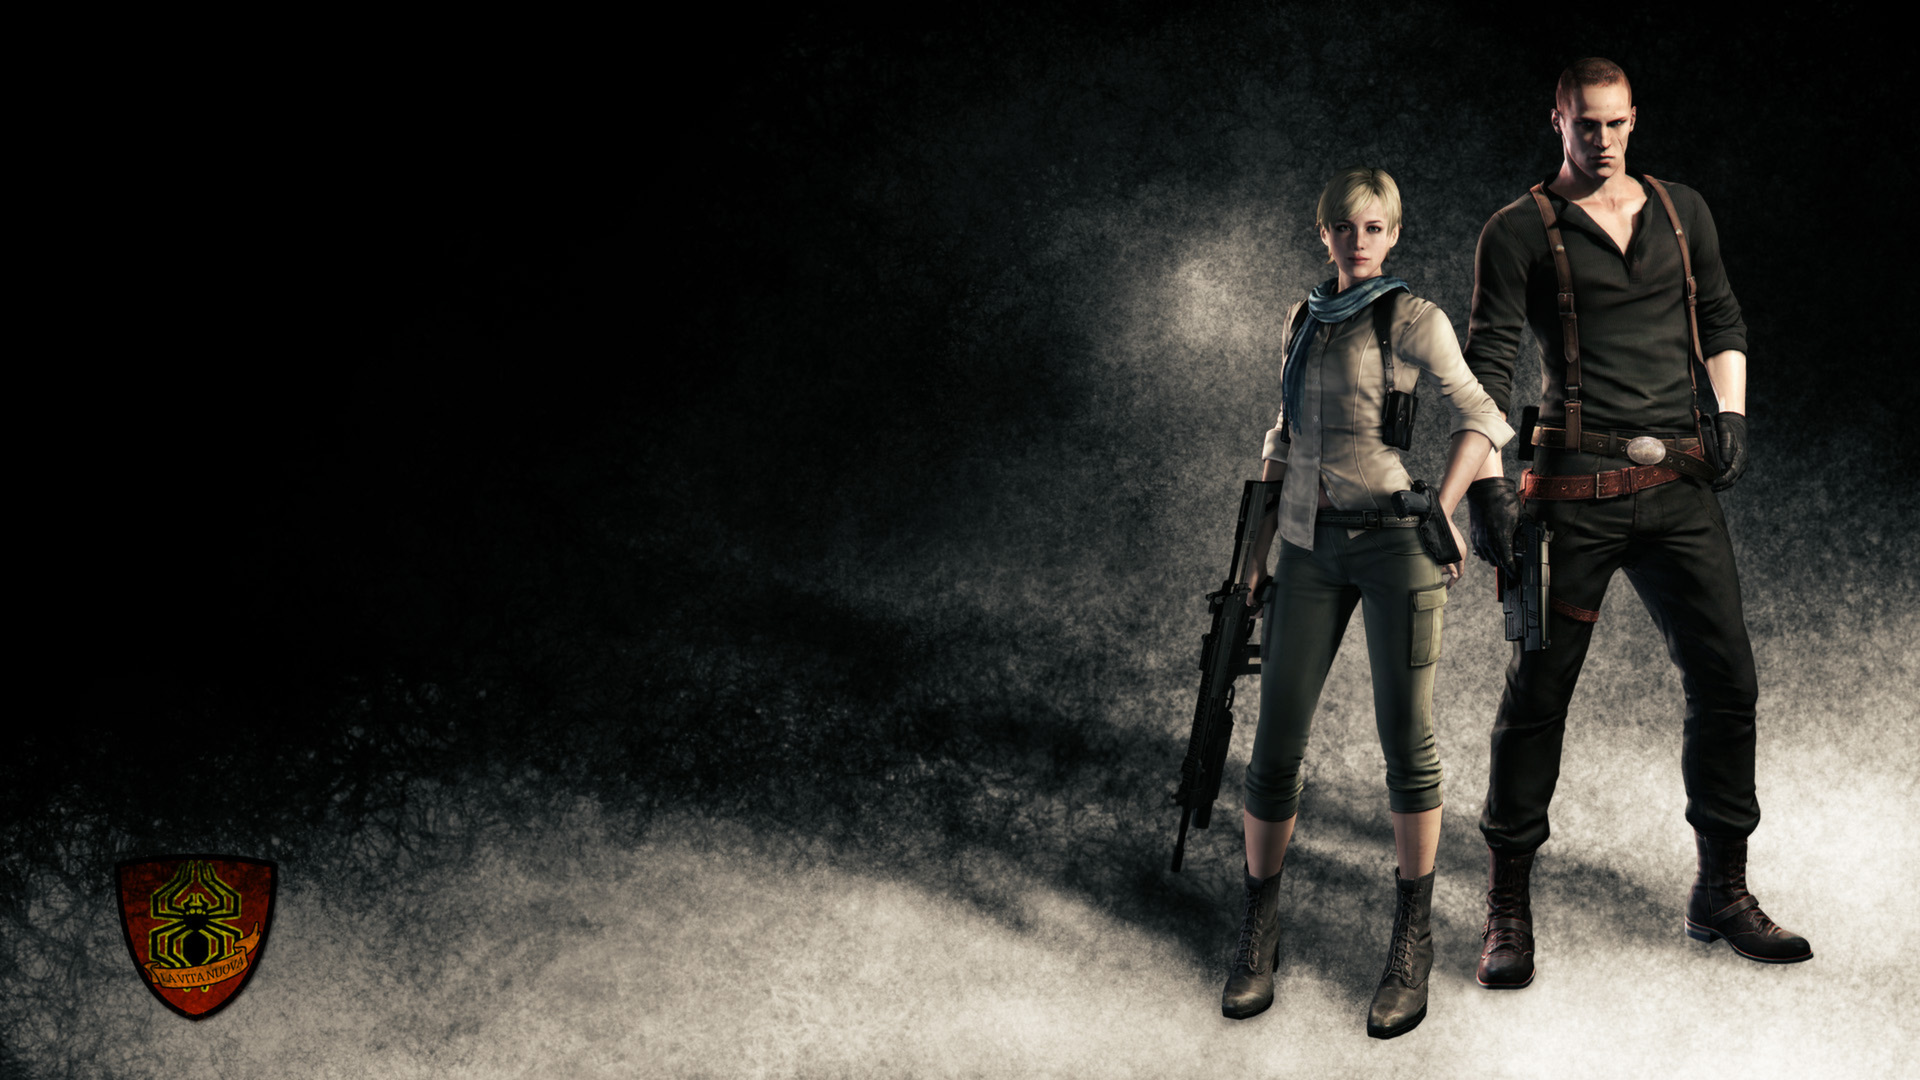 100+] Resident Evil Characters Wallpapers